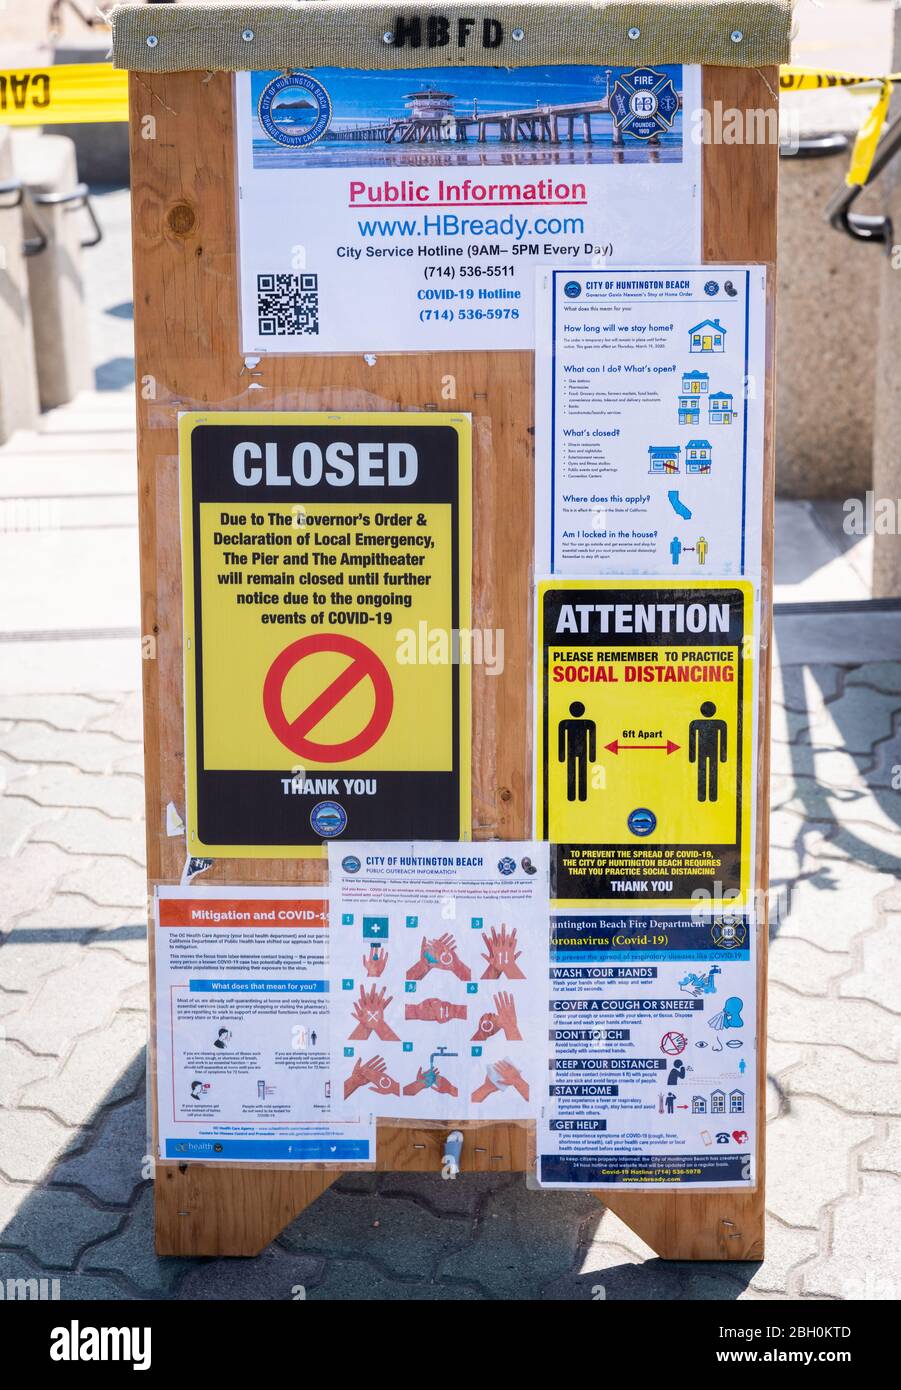 Public signs posted at the beach in Huntington Beach, California, regarding closures and health practices during the Covid-19 pandemic. Stock Photo